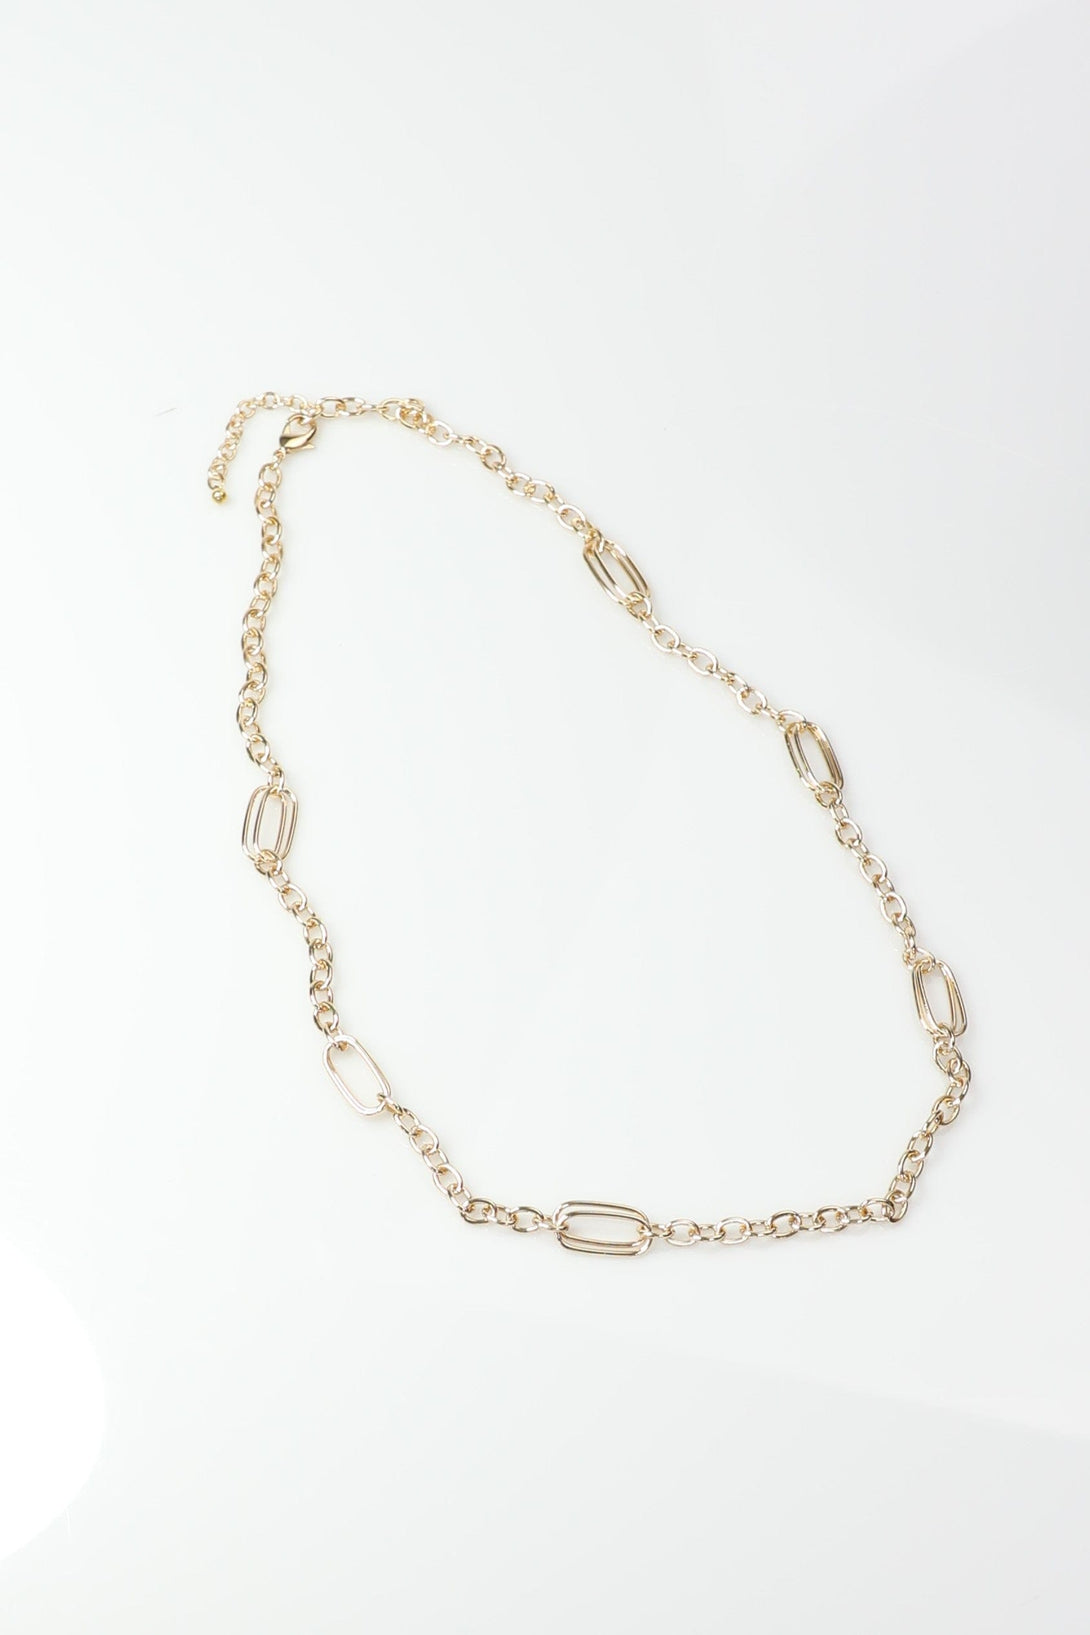 Long Gold Necklace with Paperclip Chain Accent Links